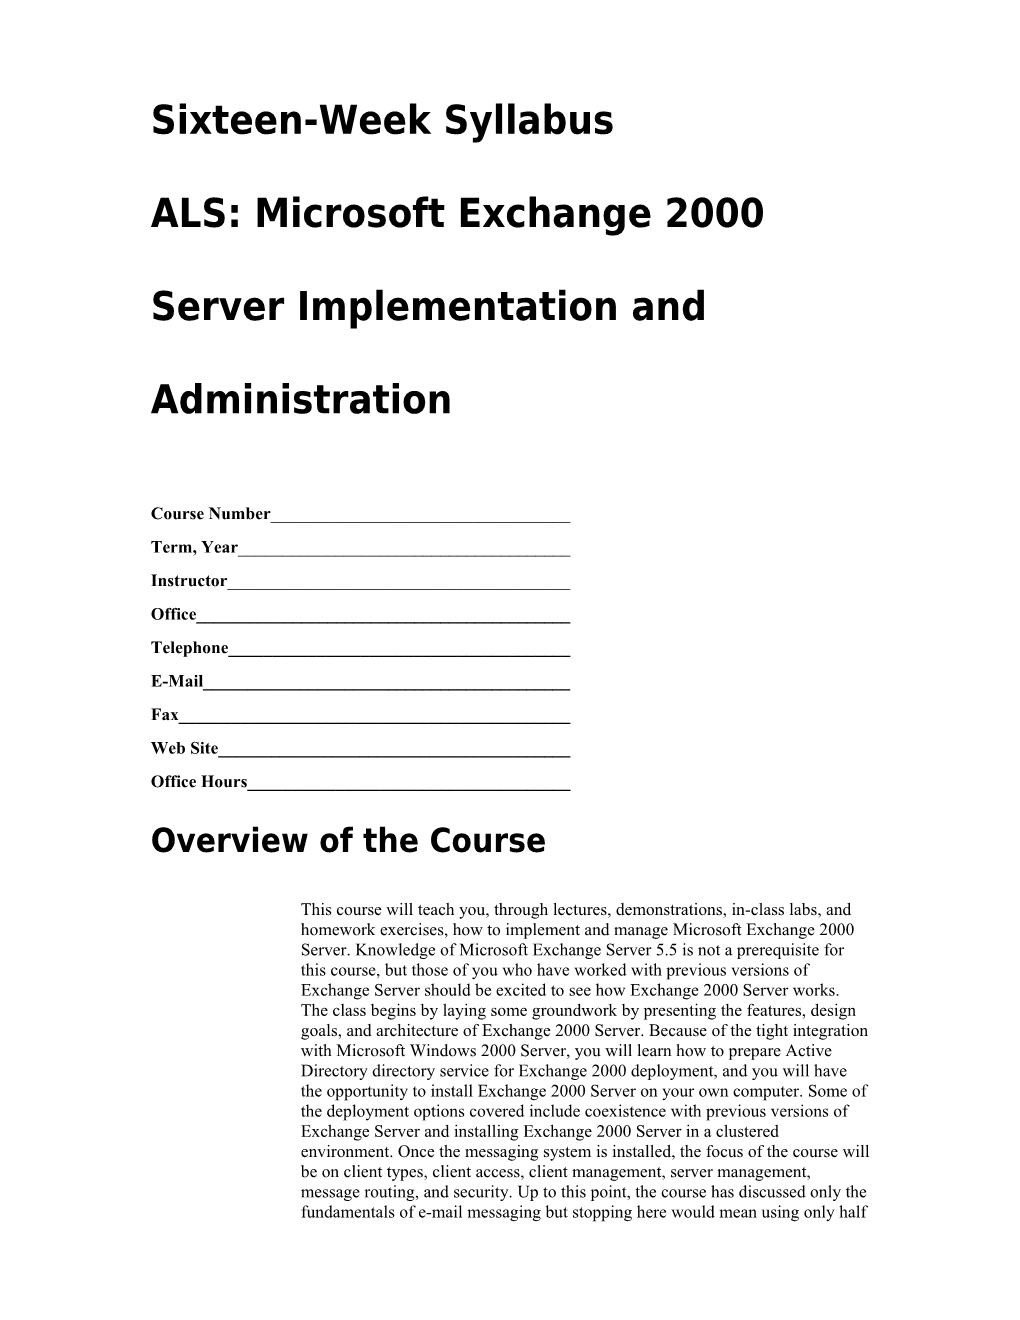 Sixteen-Week Syllabus ALS: Microsoft Exchange 2000 Server Implementation and Administration